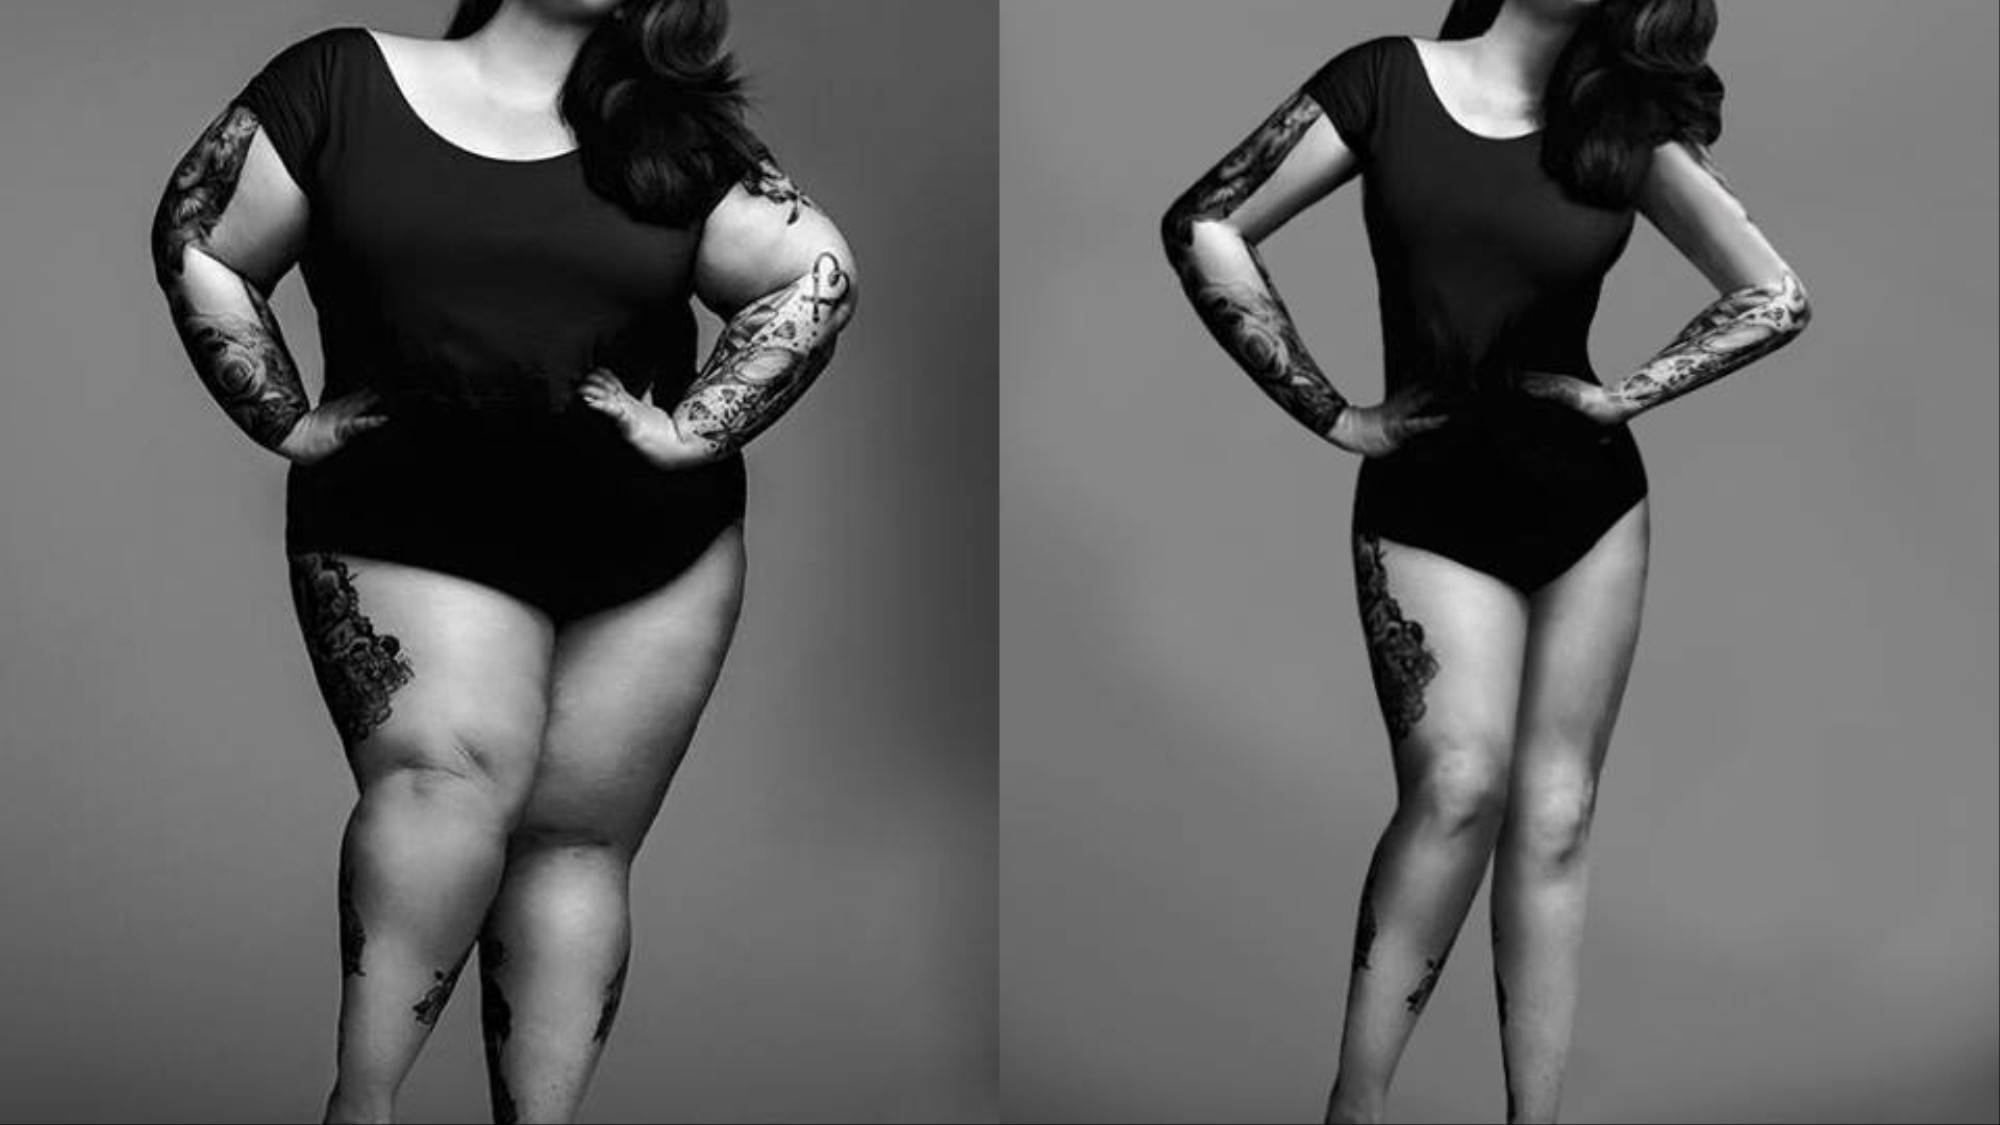 this reprehensible online group is plus-size models